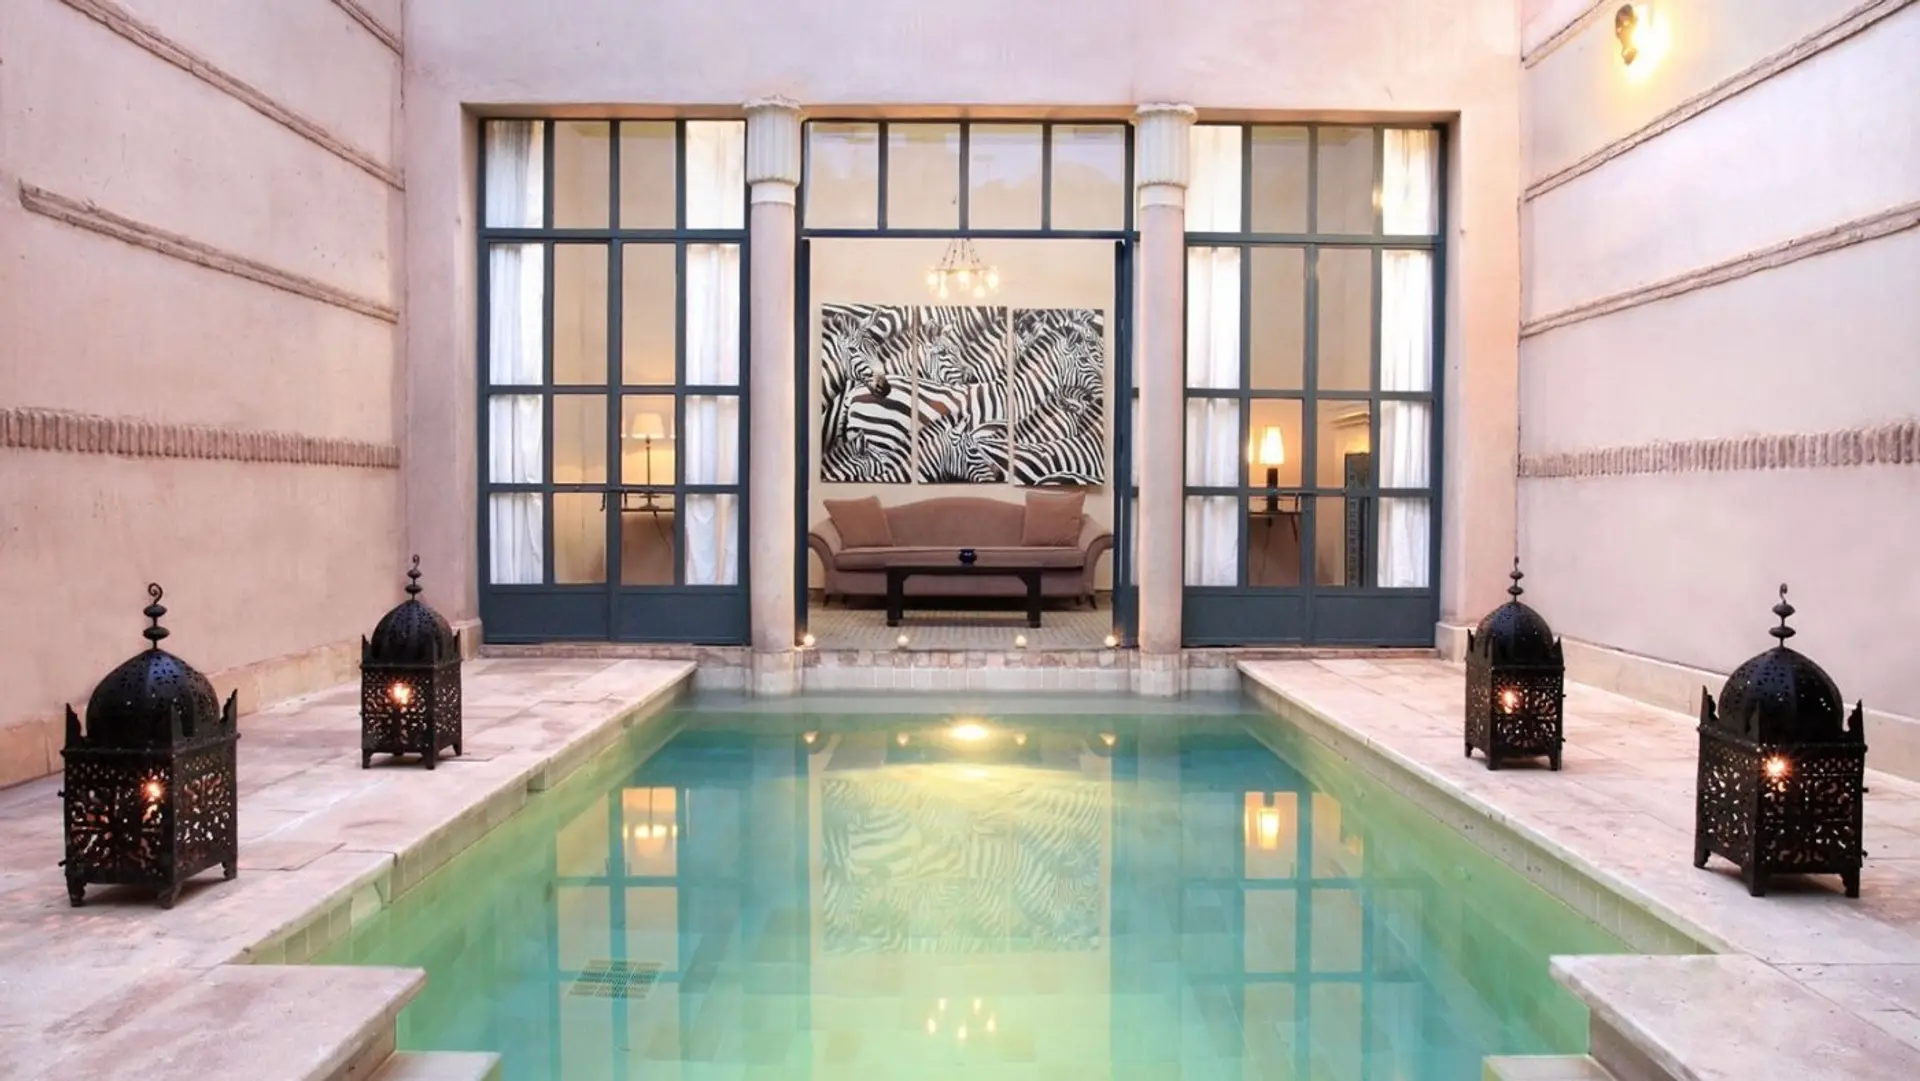 Swimming pool, white walls and open entrance to sofa area a´with zebra painting